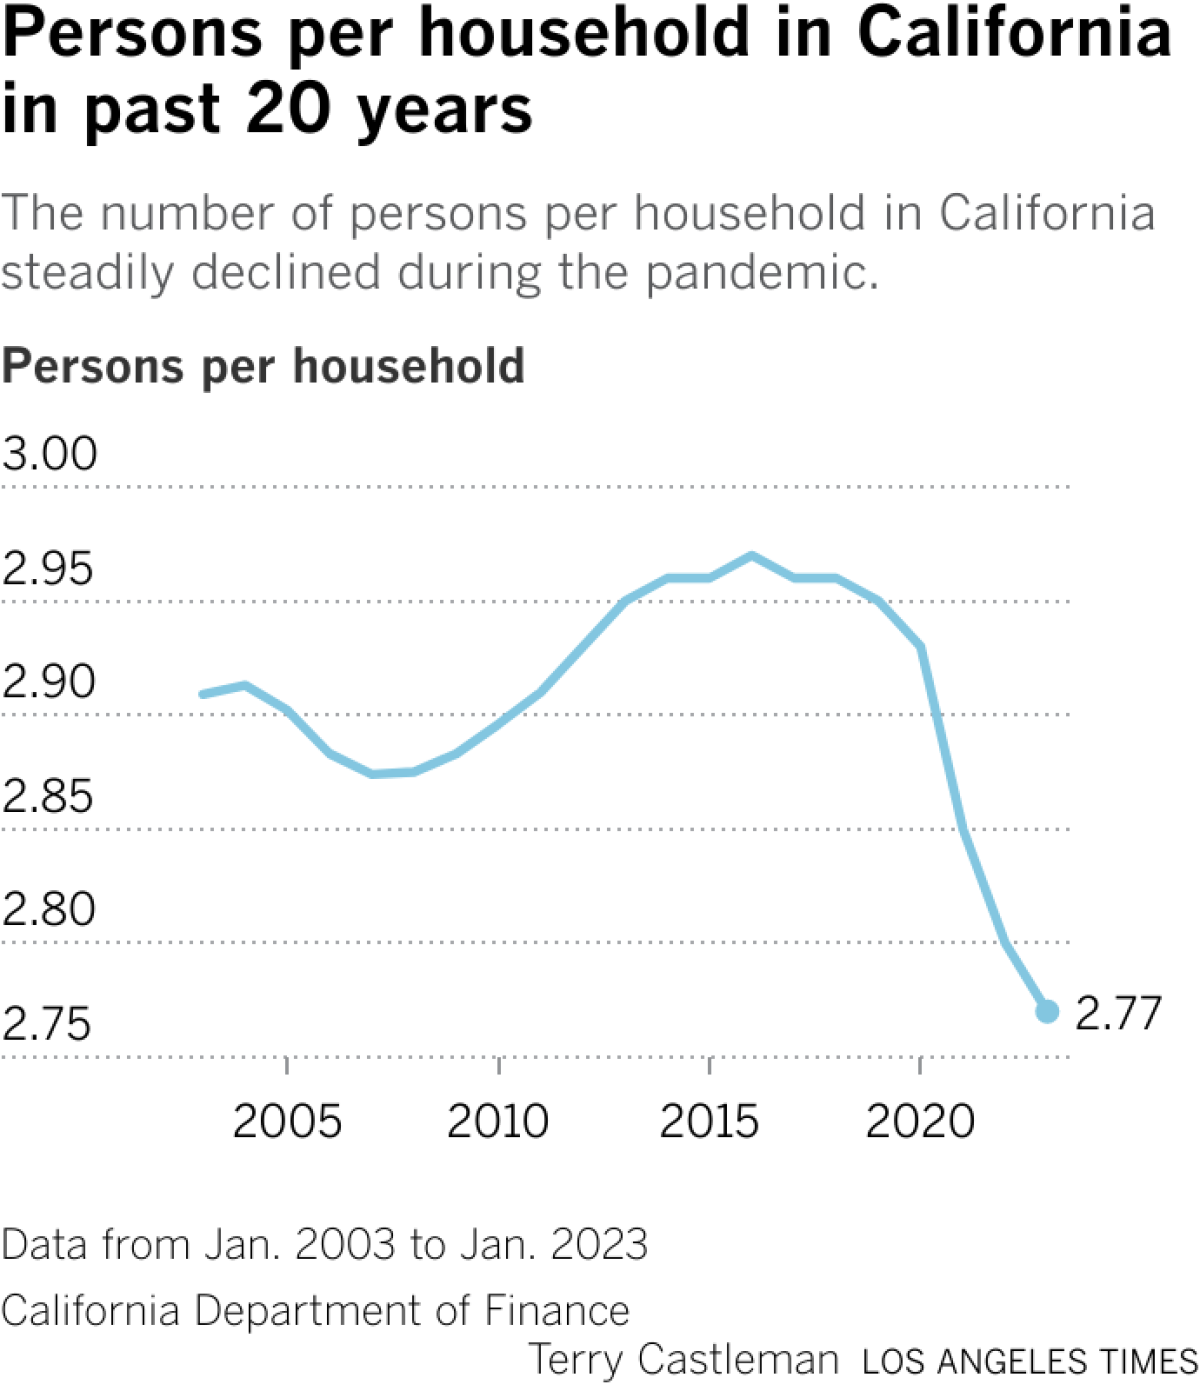 A chart showing persons per household for California housing over the past 20 years.